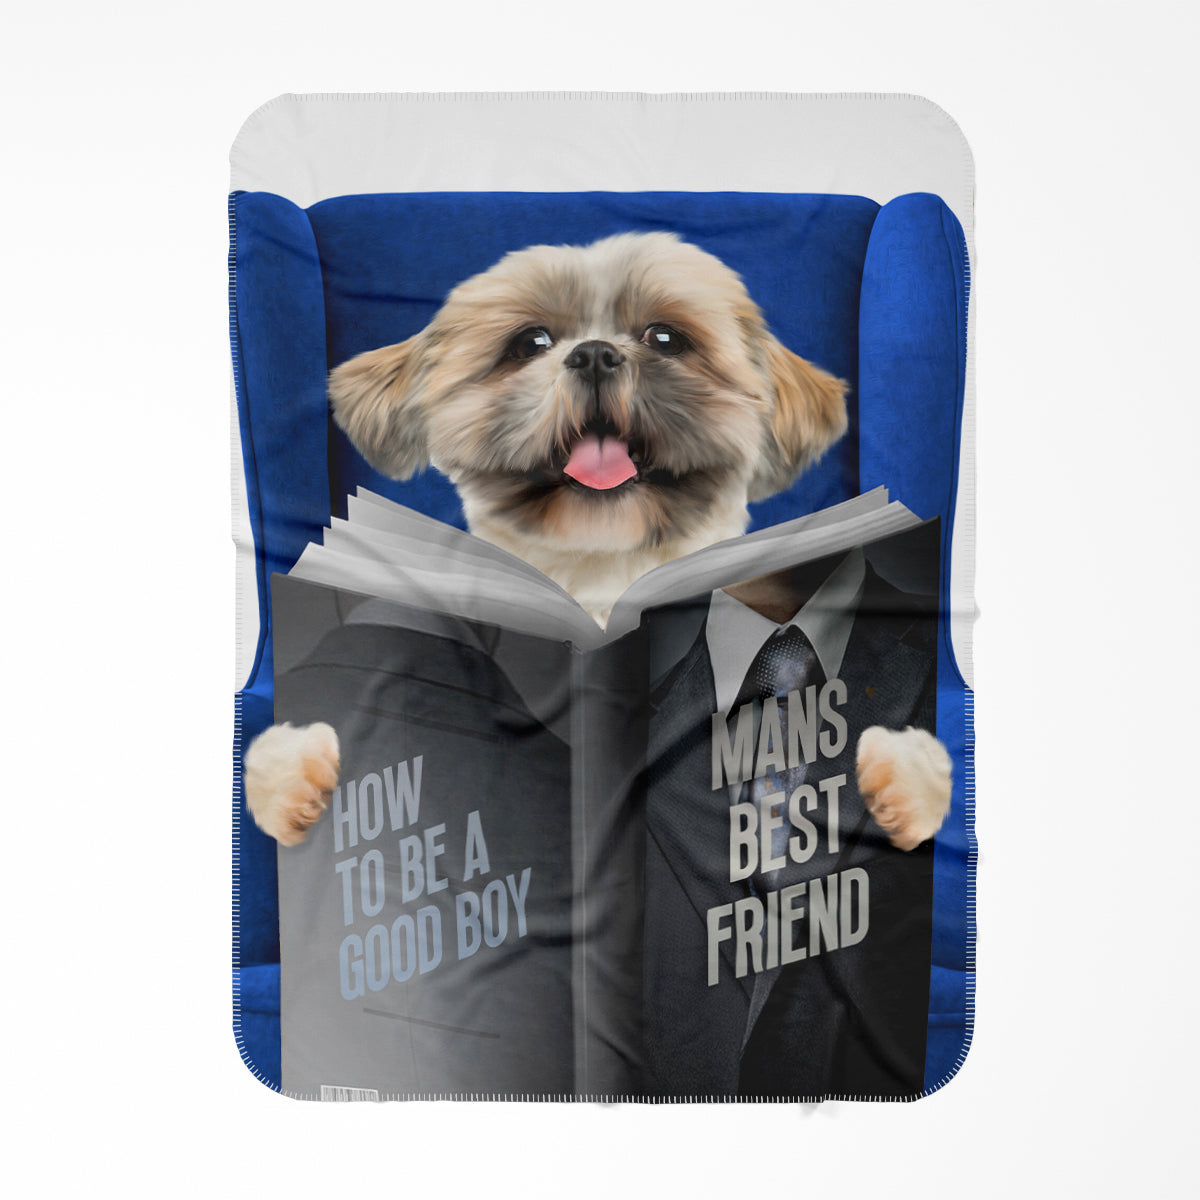 Paw & Glory, paw and glory, blanket with your dog on it, personalized blankets for dogs, Custom dog blanket, pet on blanket, personalized pet blanket, custom dog blanket, Pet Portrait blanket,